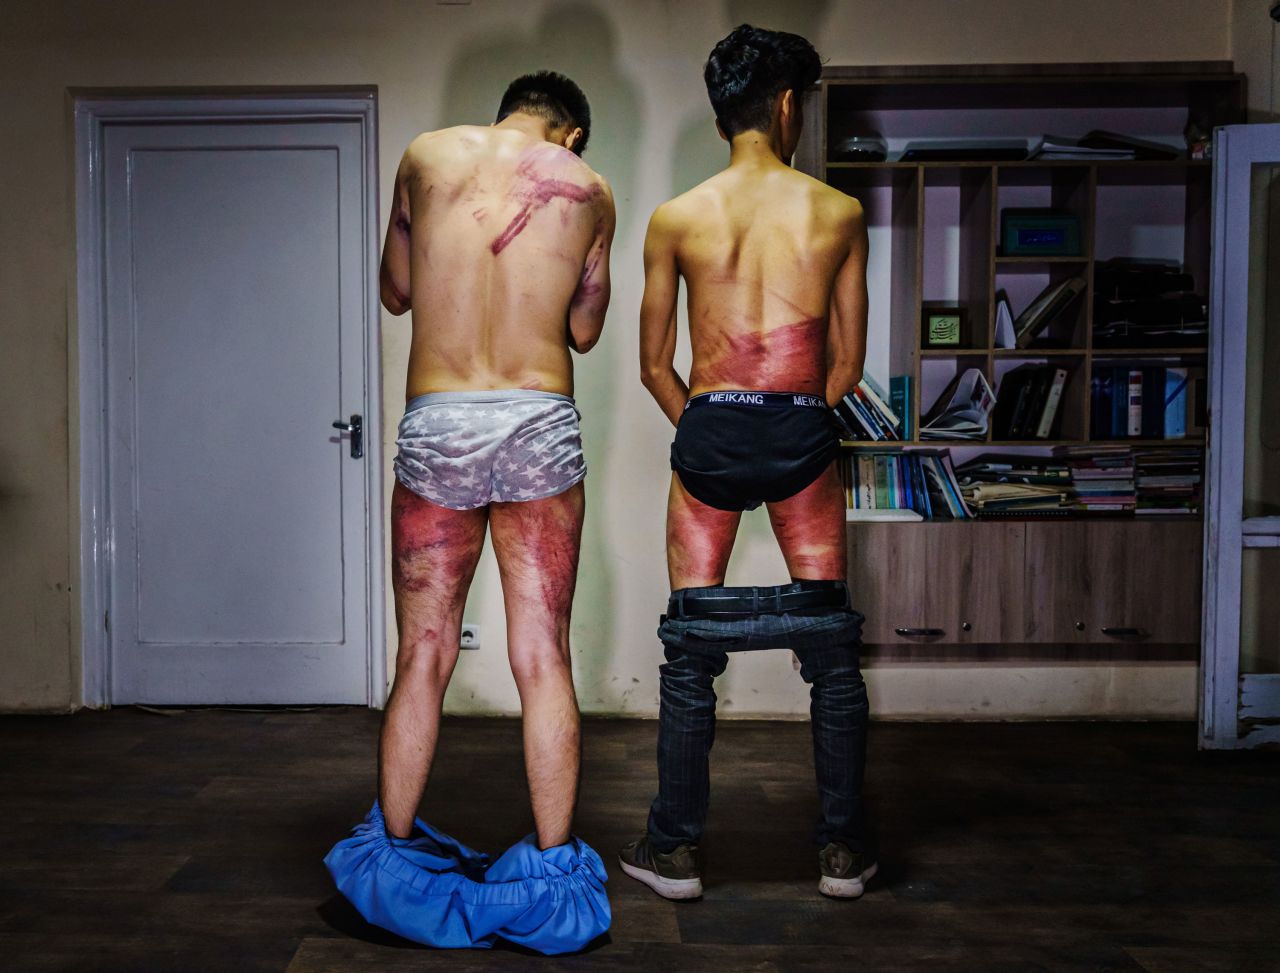 Journalists from Afghanistan's Etilaatroz newspaper — video journalist Nemat Naqdi, left, and video editor Taqi Daryabi — undress to show wounds they sustained after Taliban fighters tortured and beat them while in custody. They had been arrested while reporting on a <a href="https://www.cnn.com/2021/09/08/asia/afghanistan-women-taliban-government-intl/index.html" target="_blank">women's rights protest in Kabul</a> on Wednesday, September 8. 